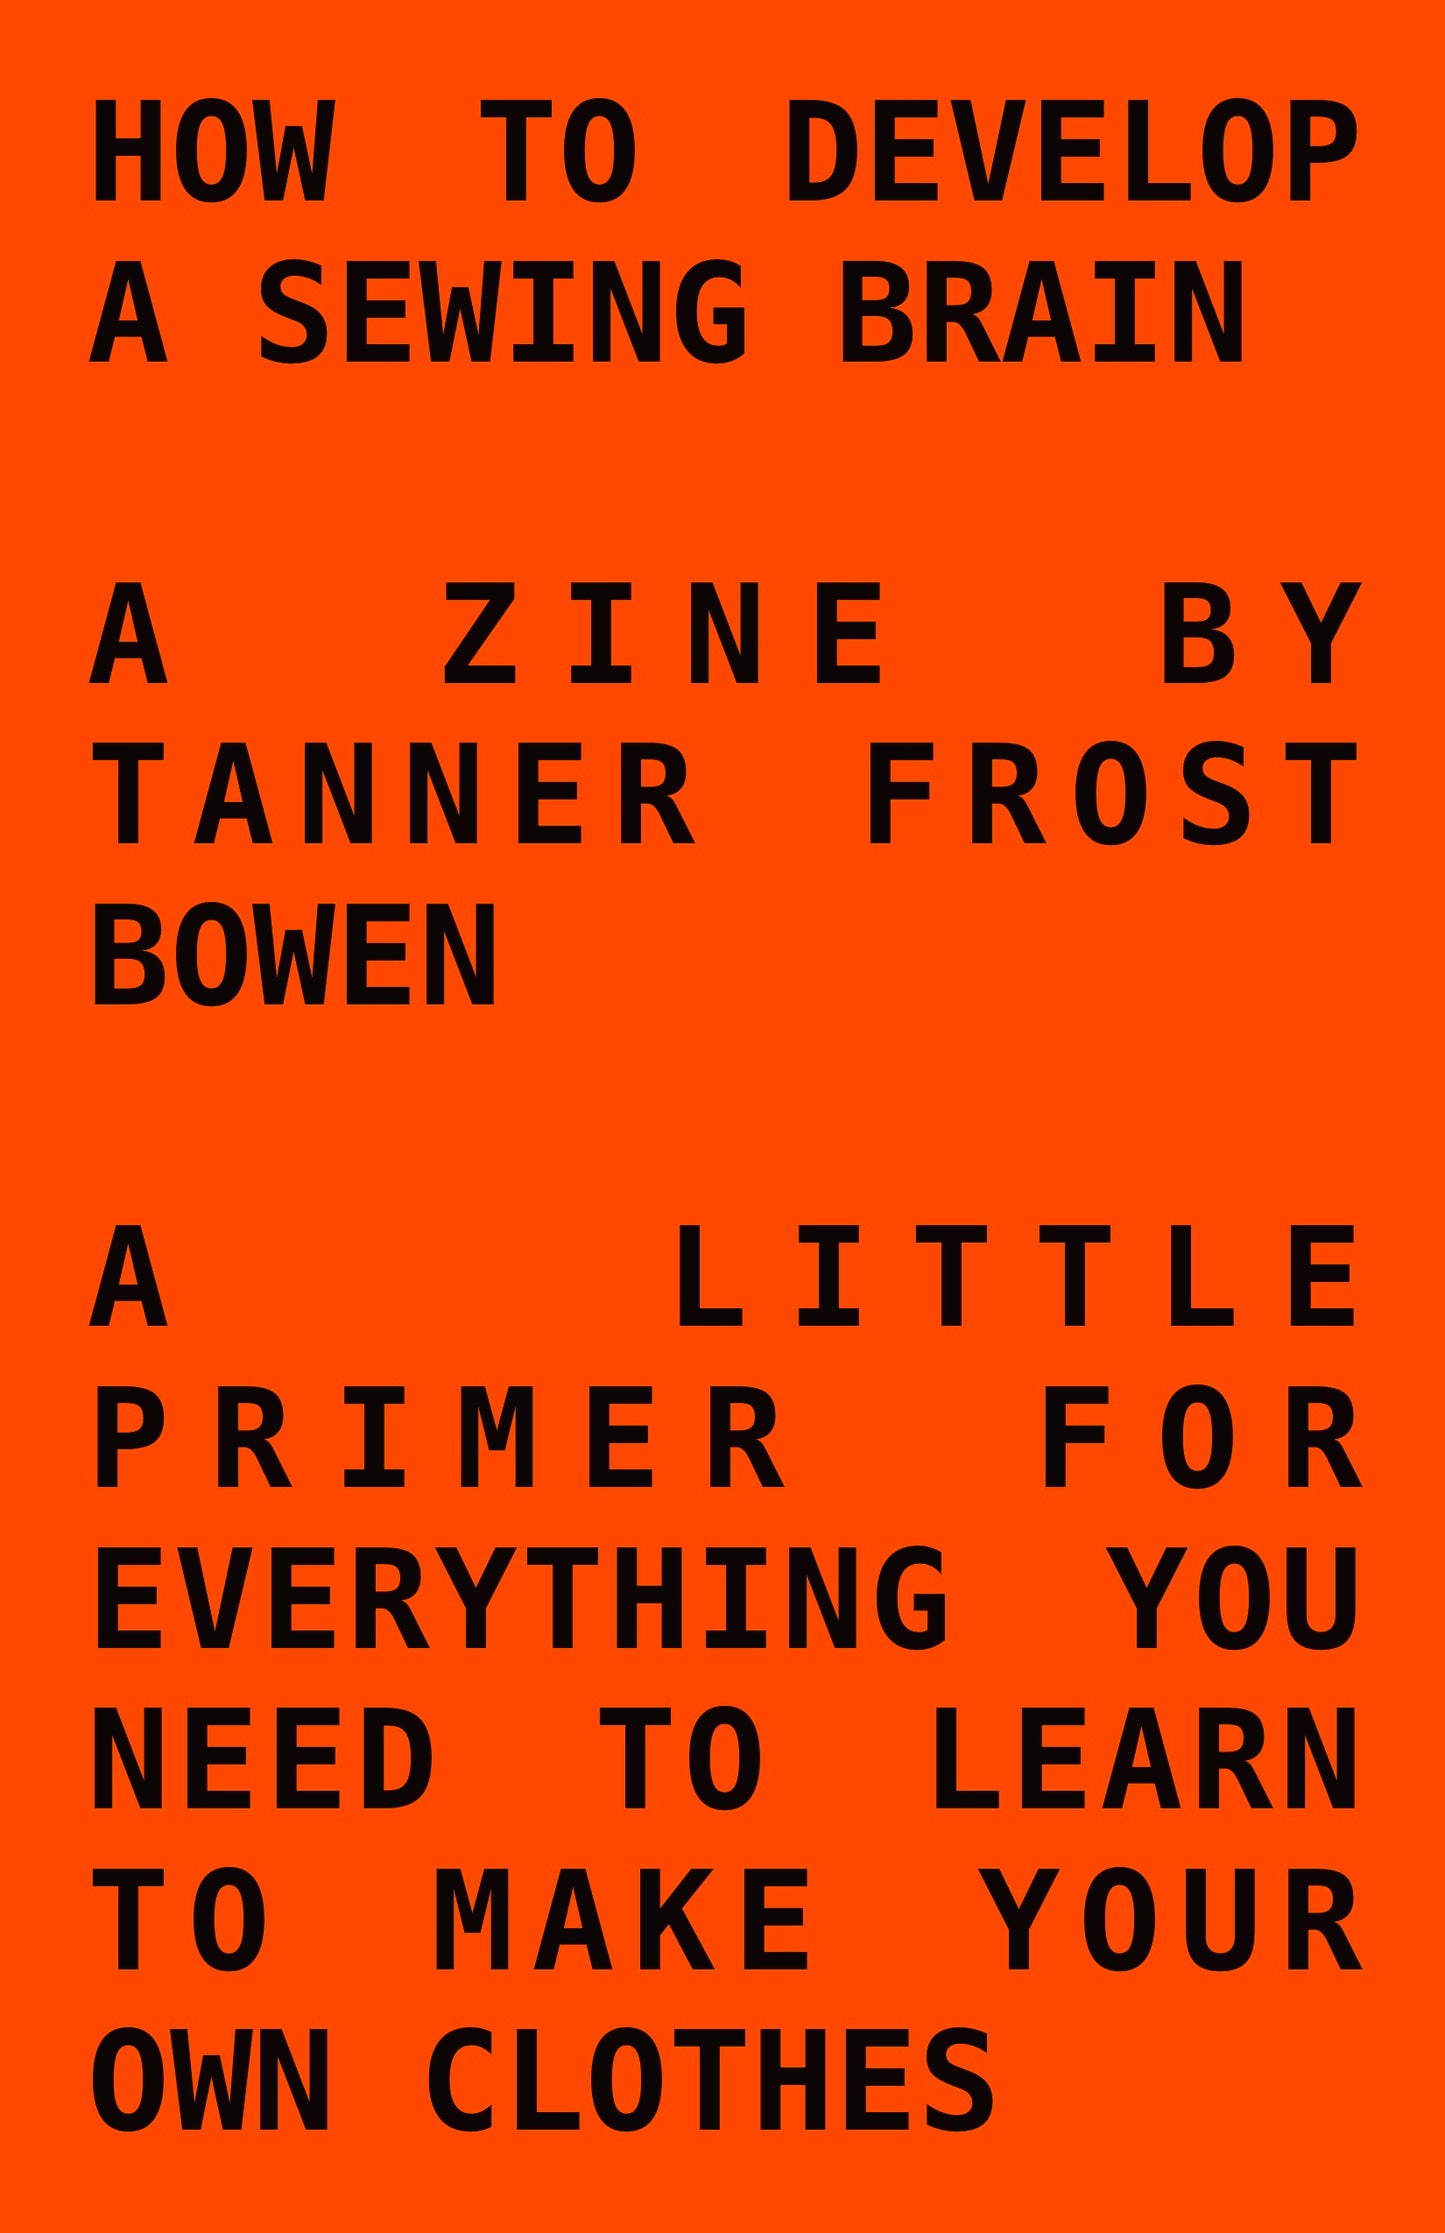 How to Develop a Sewing Brain Zine